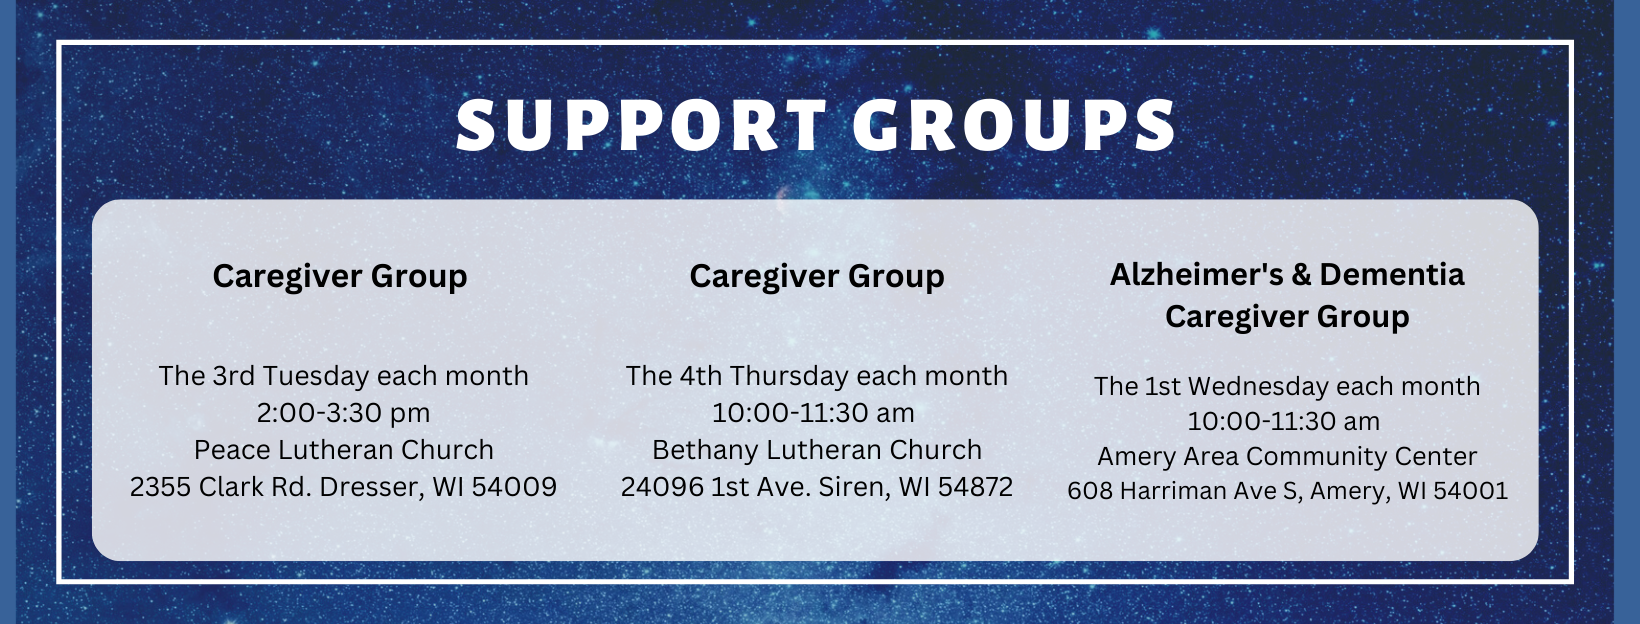 Support Group Information